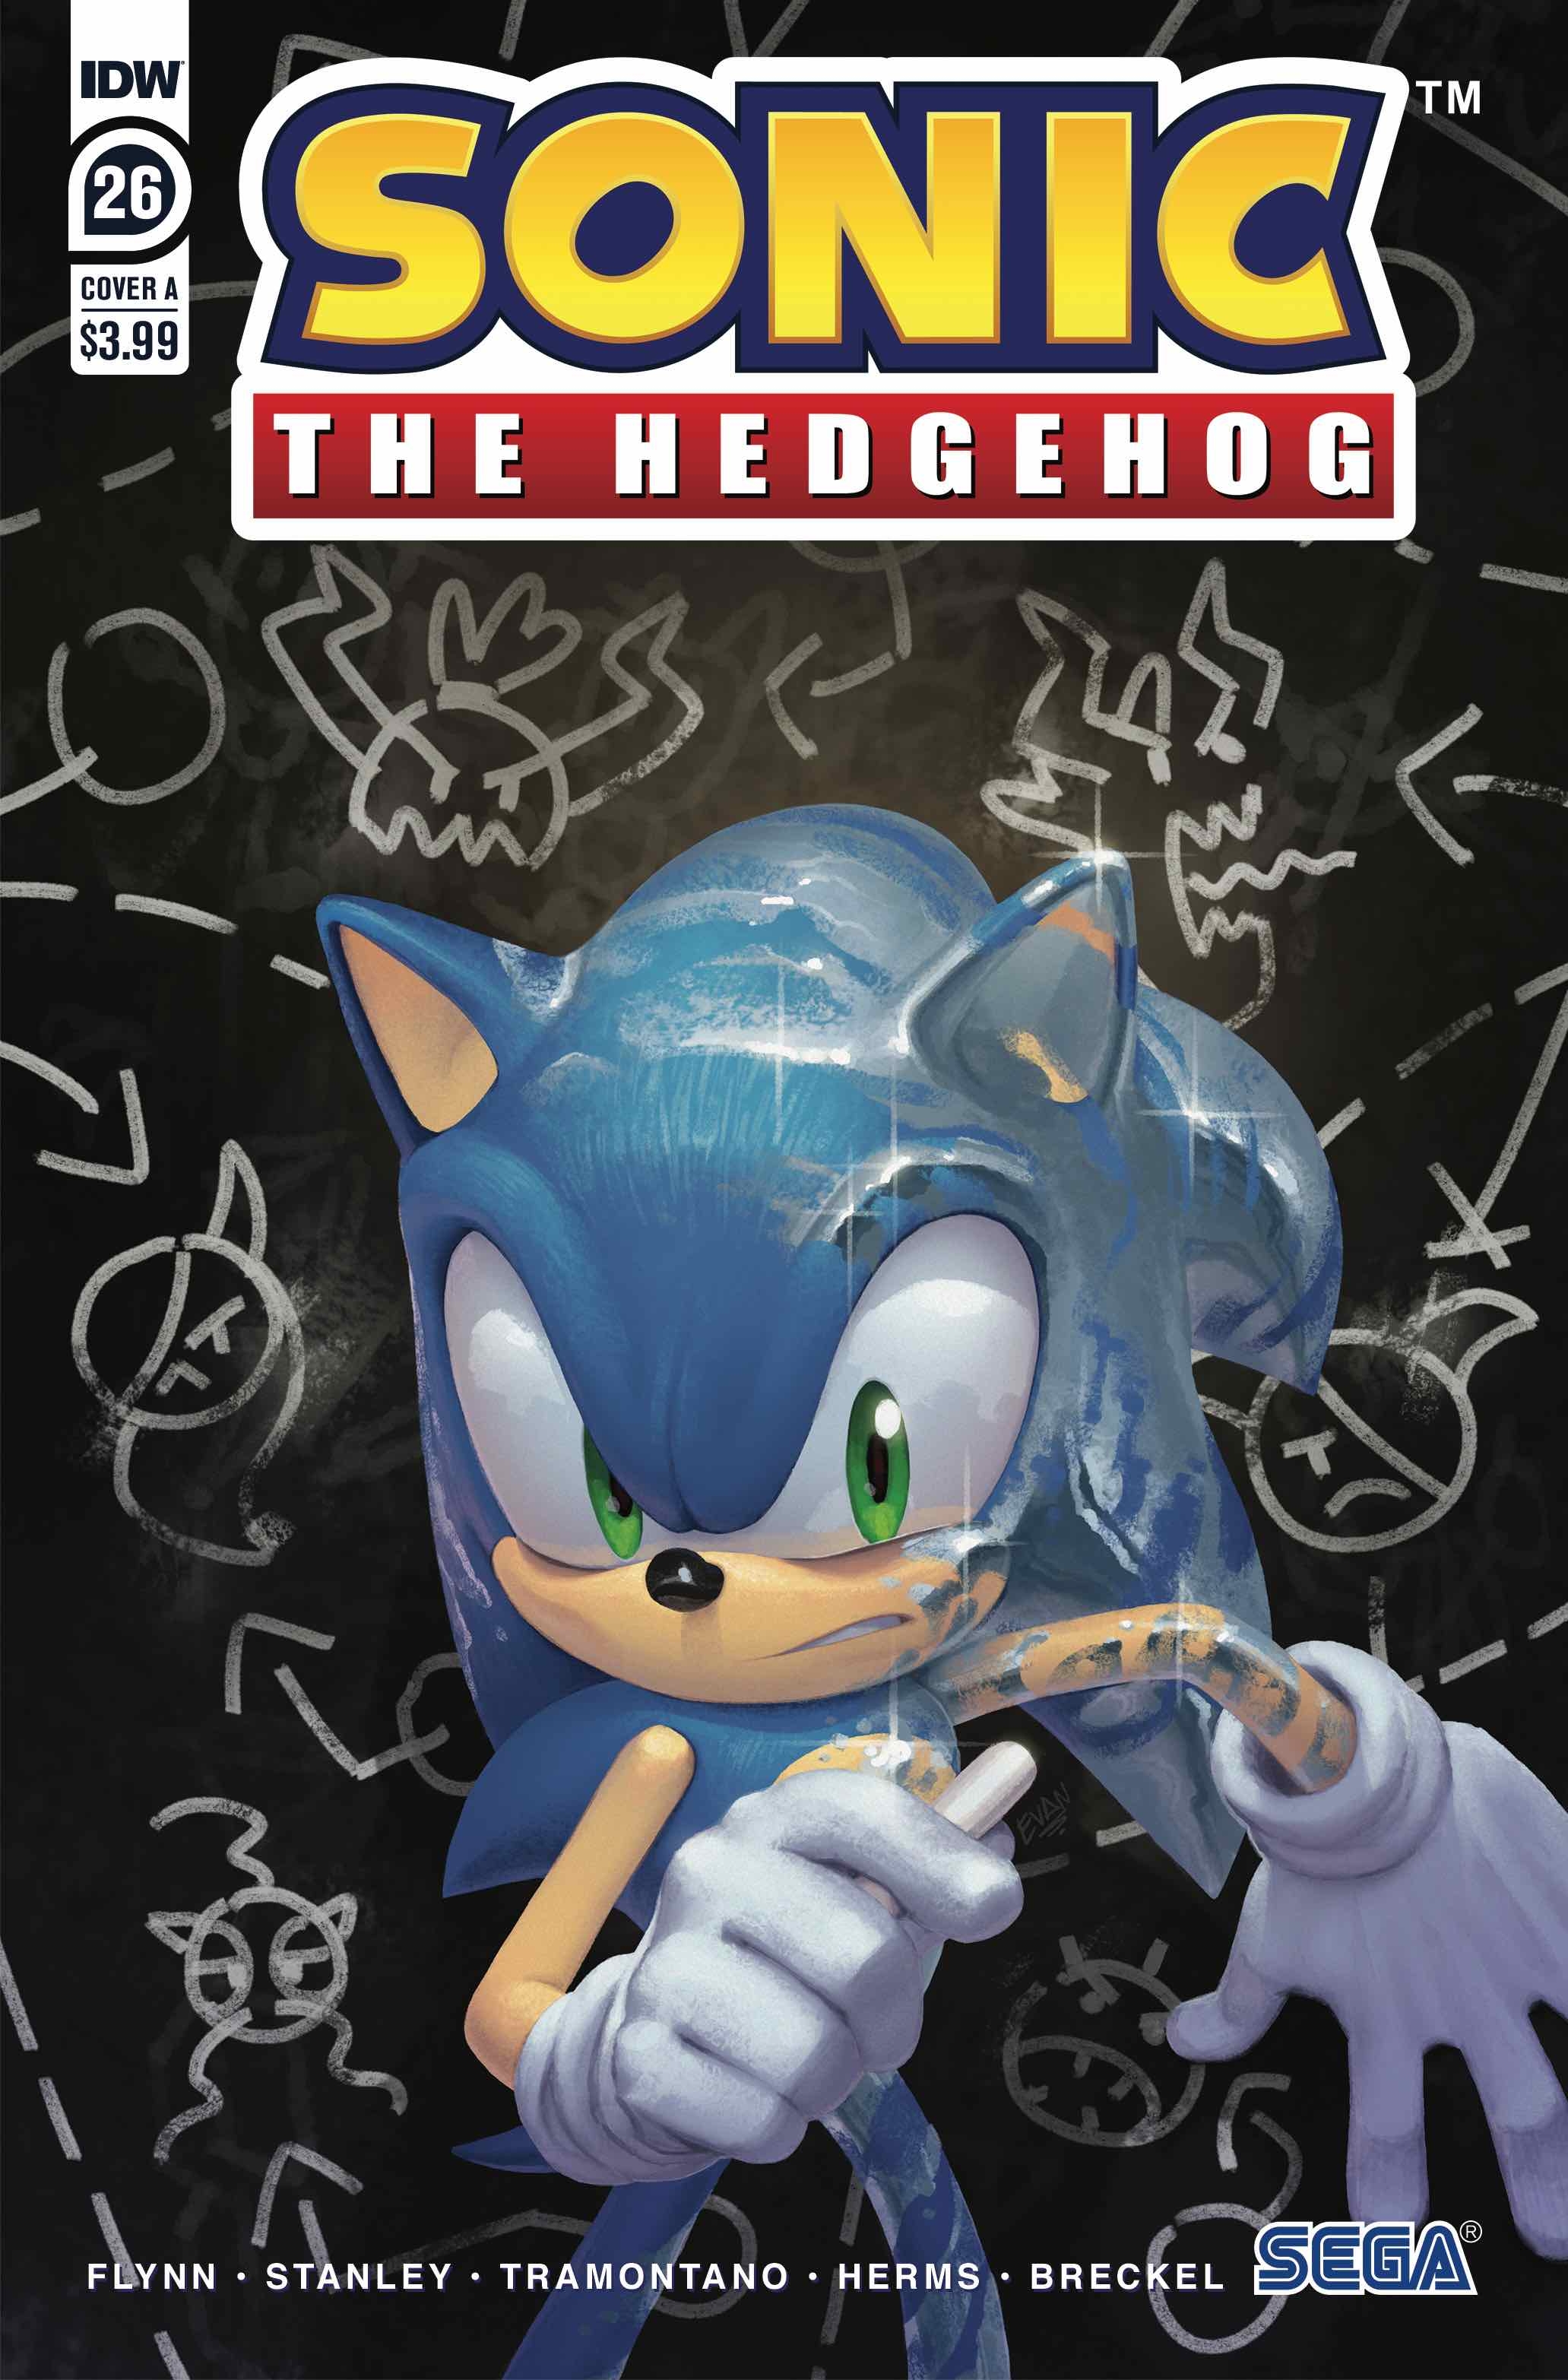 Semi Frequent Sonic Facts 🔫 on X: In the IDW's Sonic the